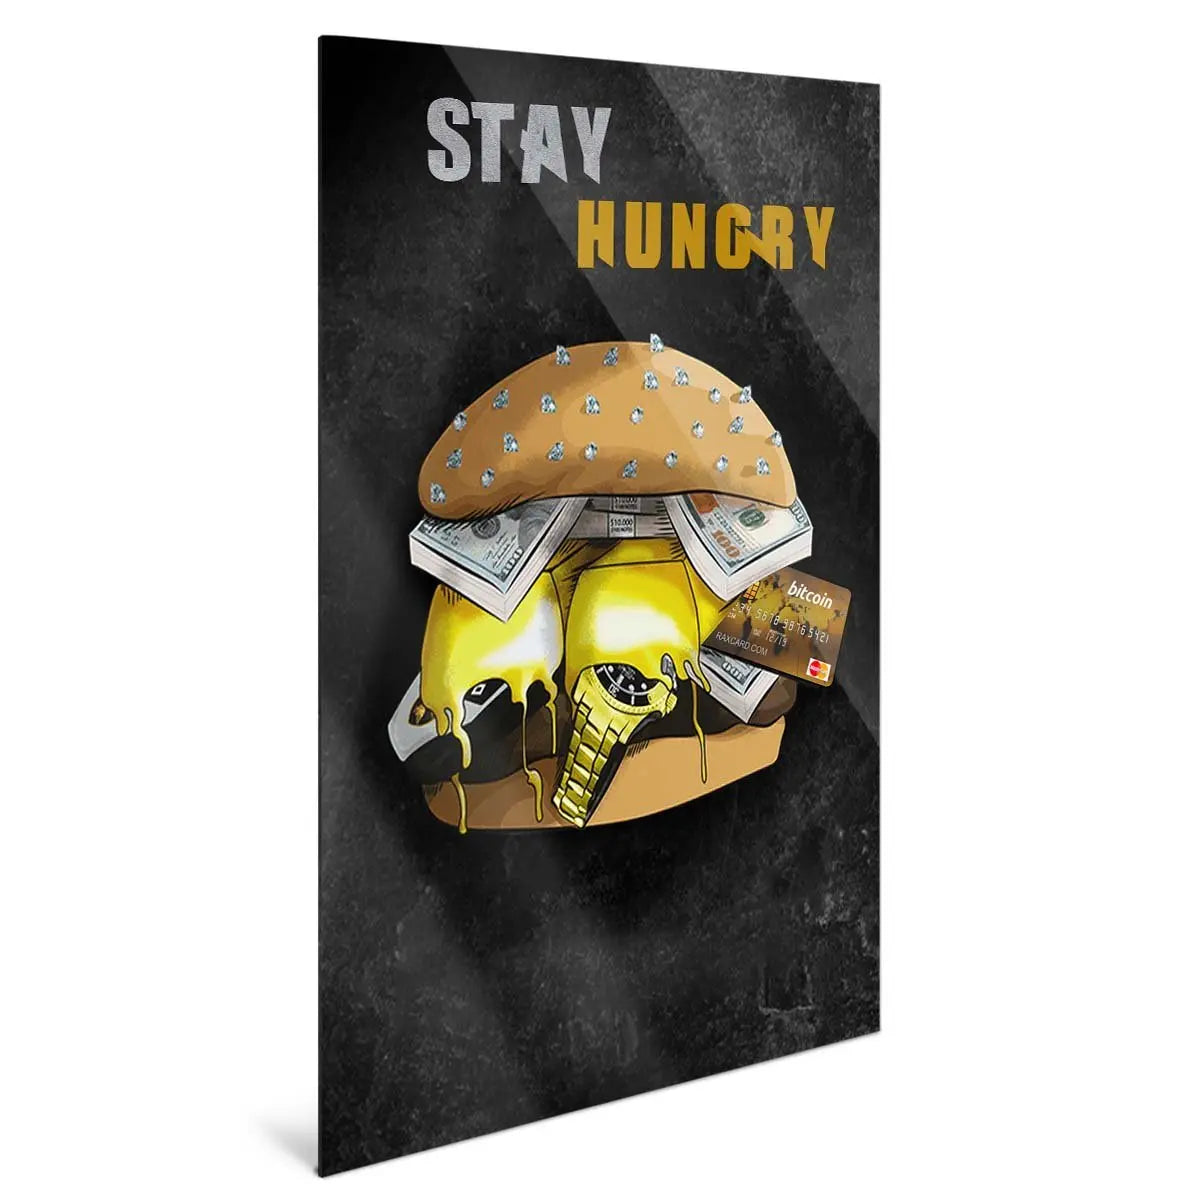 "STAY HUNGRY" - Art For Everyone